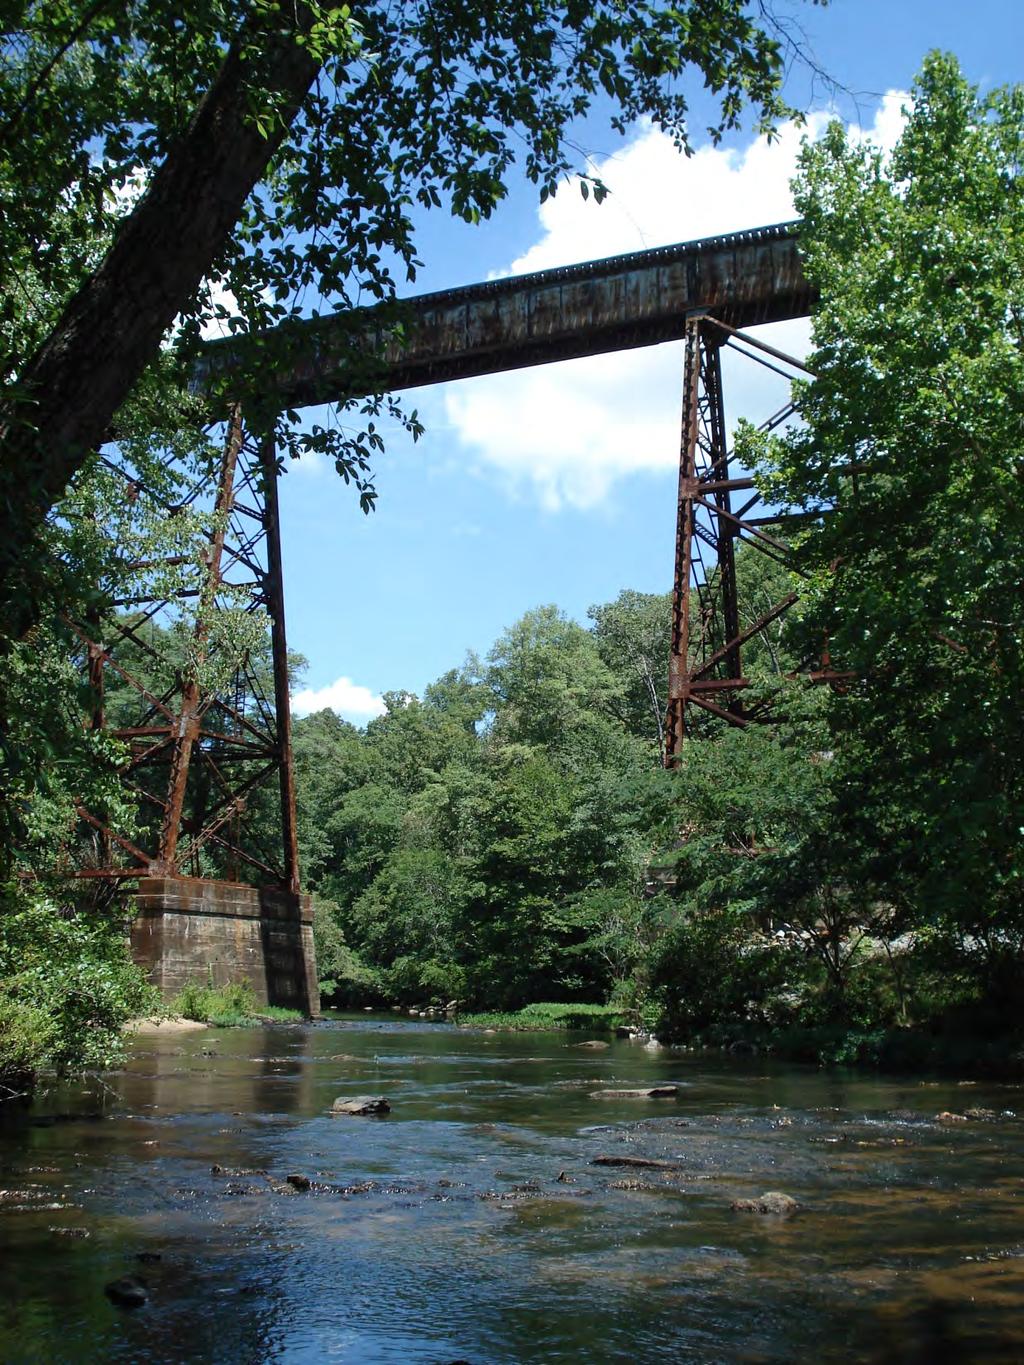 The Headwaters of Hatchet Hatchet originates in Clay County and flows down to Goodwater This section is often too shallow to float The Goodwater Train Trestle is on this stretch and is